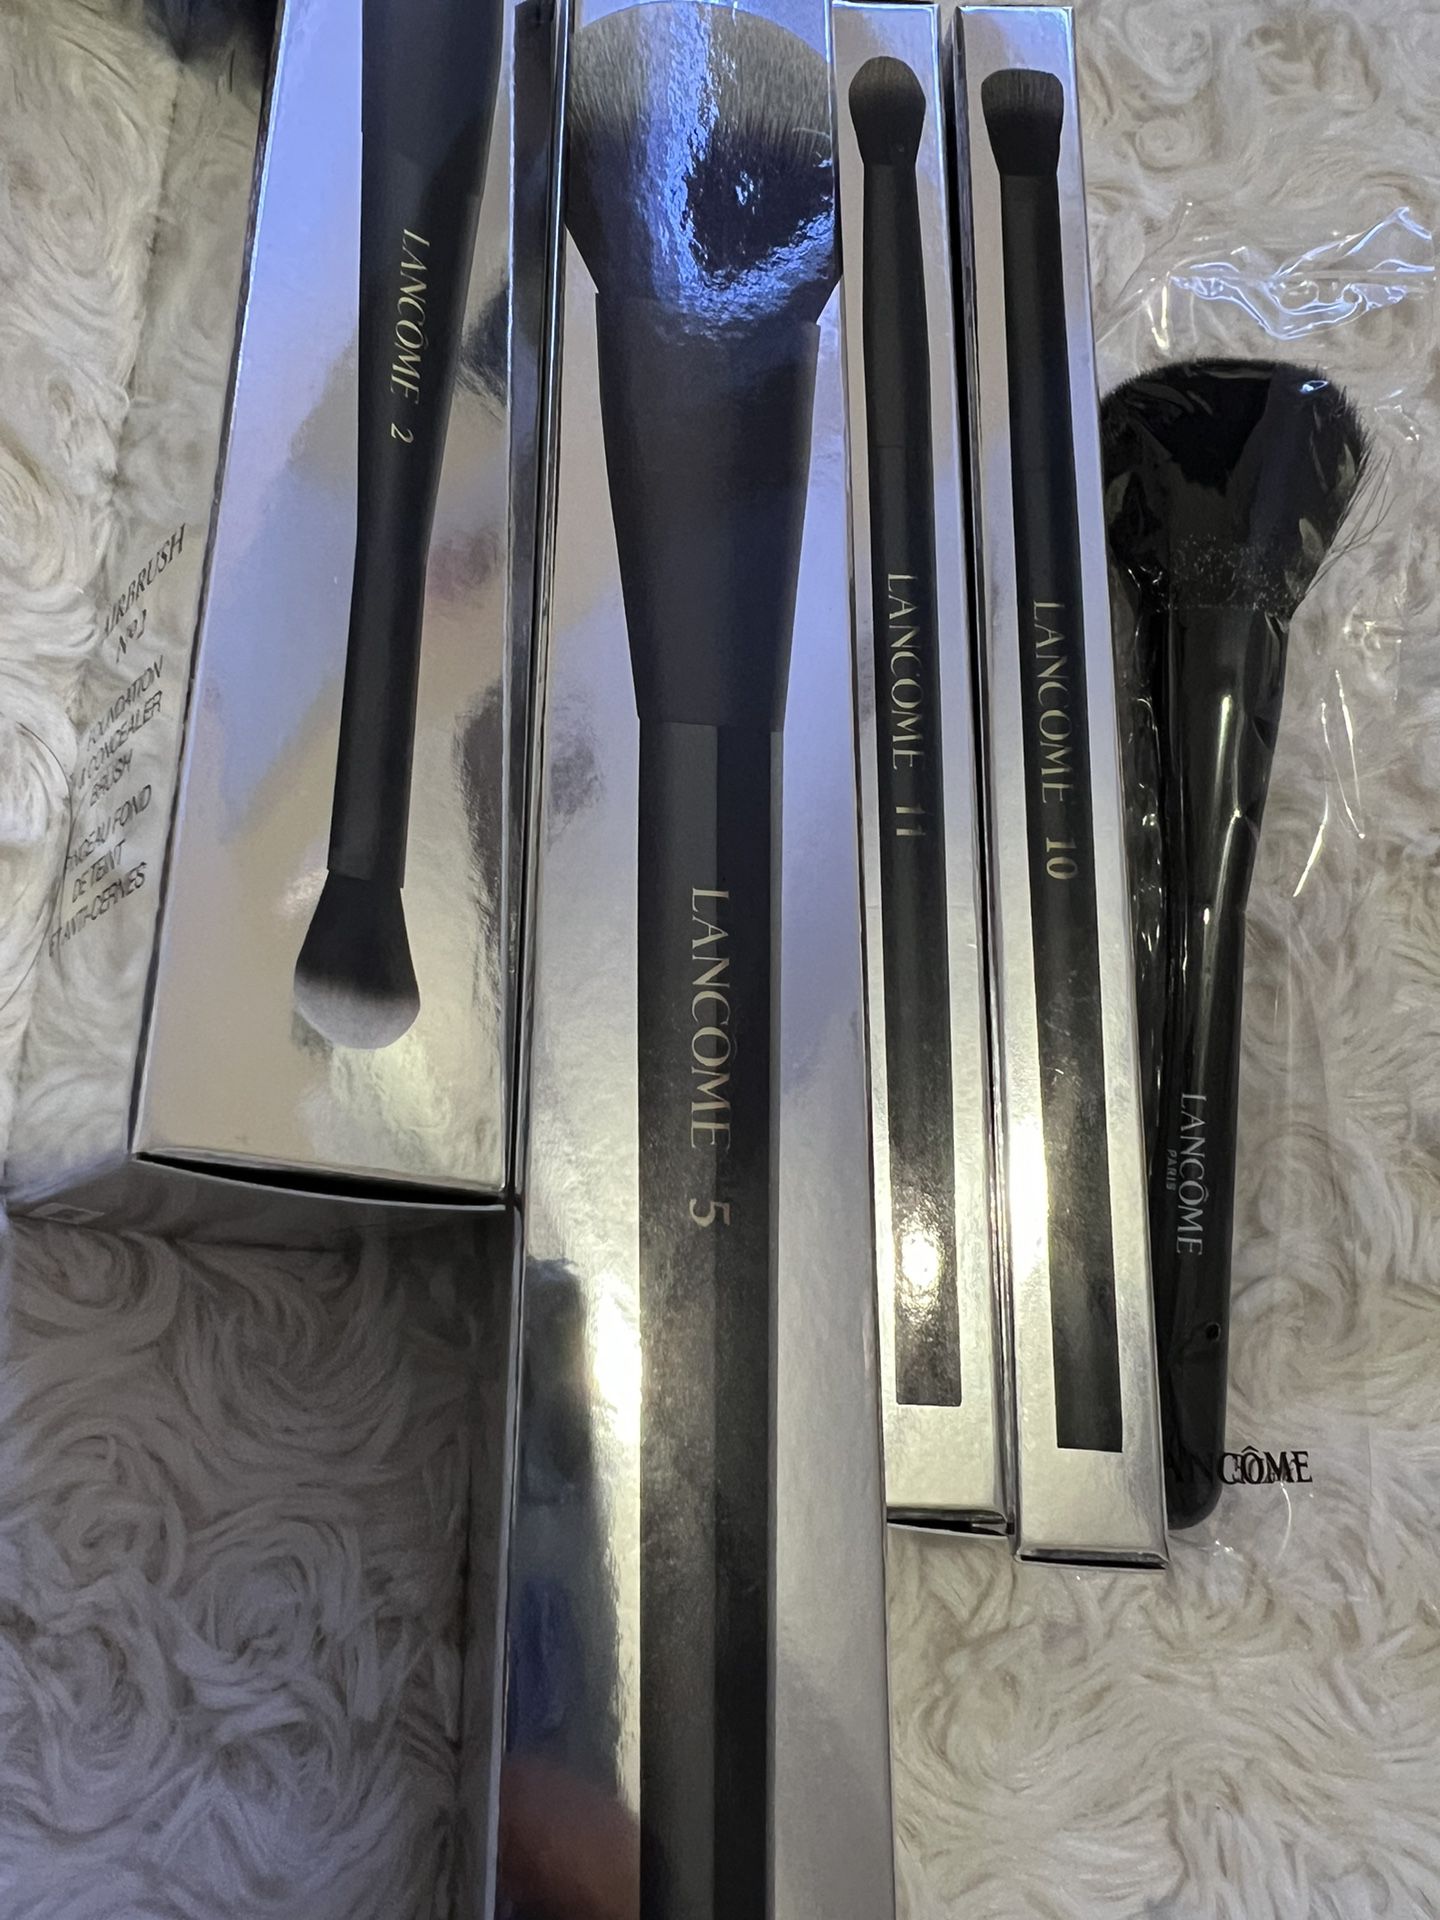 Lancome Makeup Brushes And Beauty Blenders 